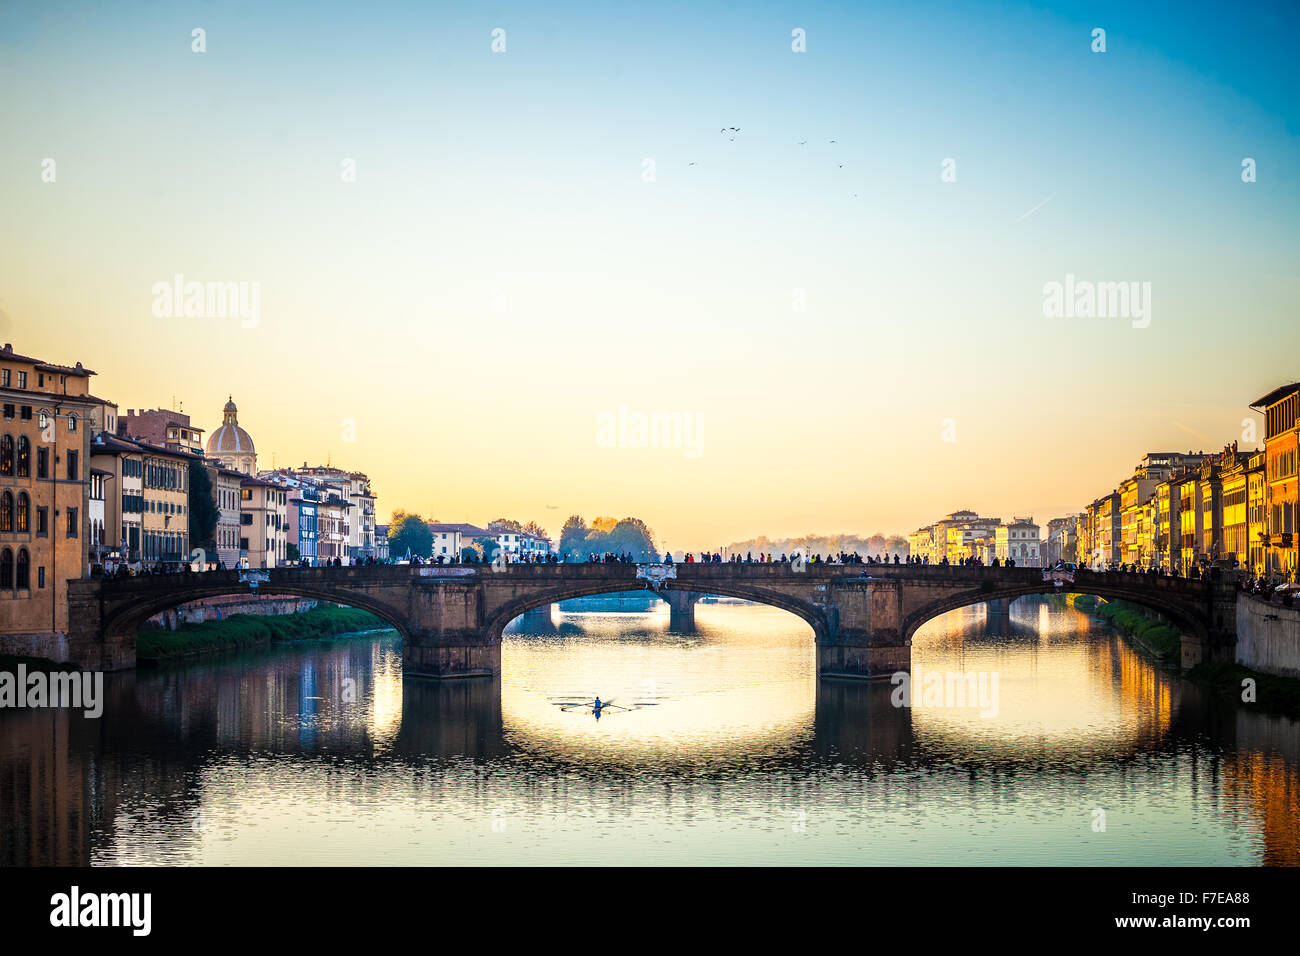 The amazing Ponte Vecchio over Arno River in Florence, Italy. Under the bridge one guy rowing Stock Photo